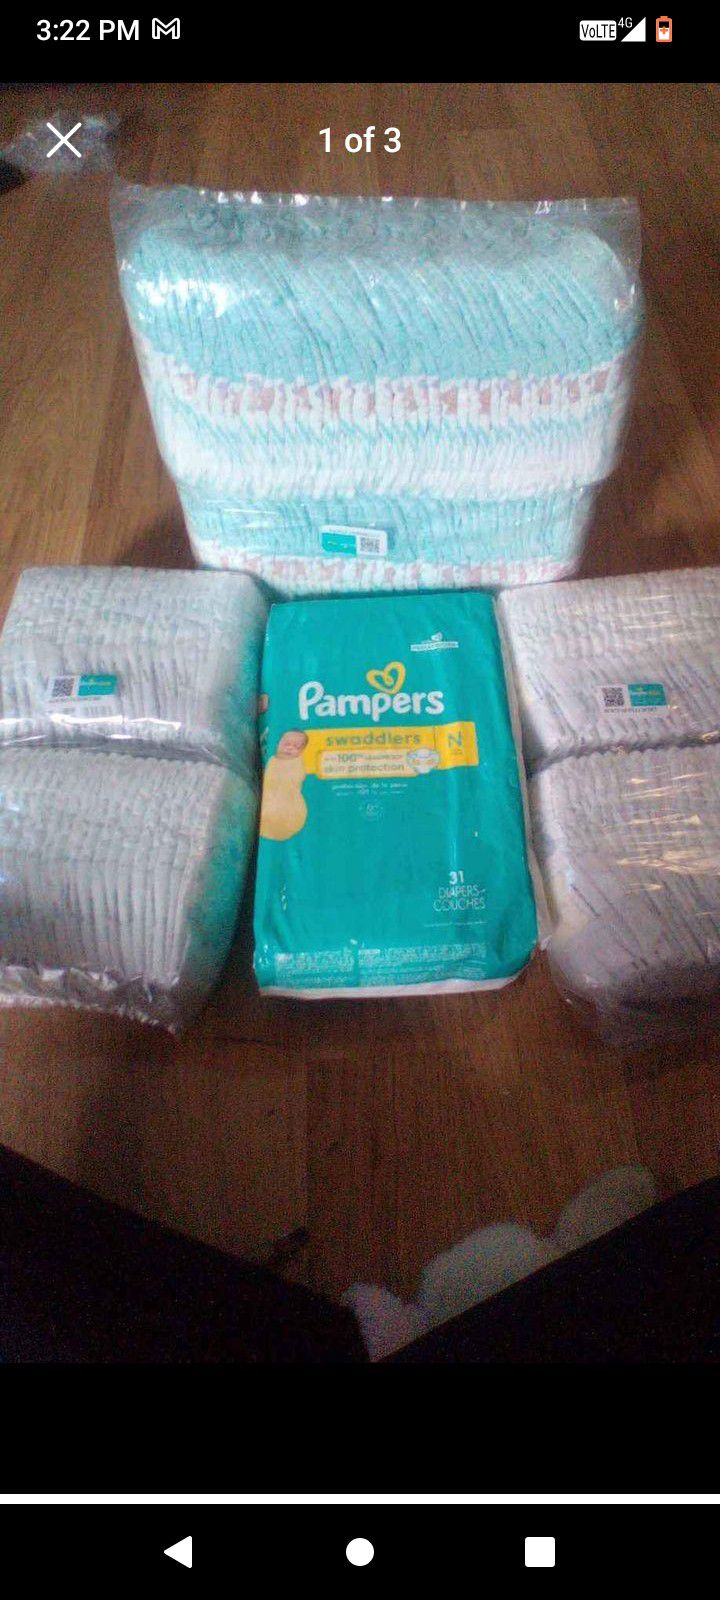 Pampers